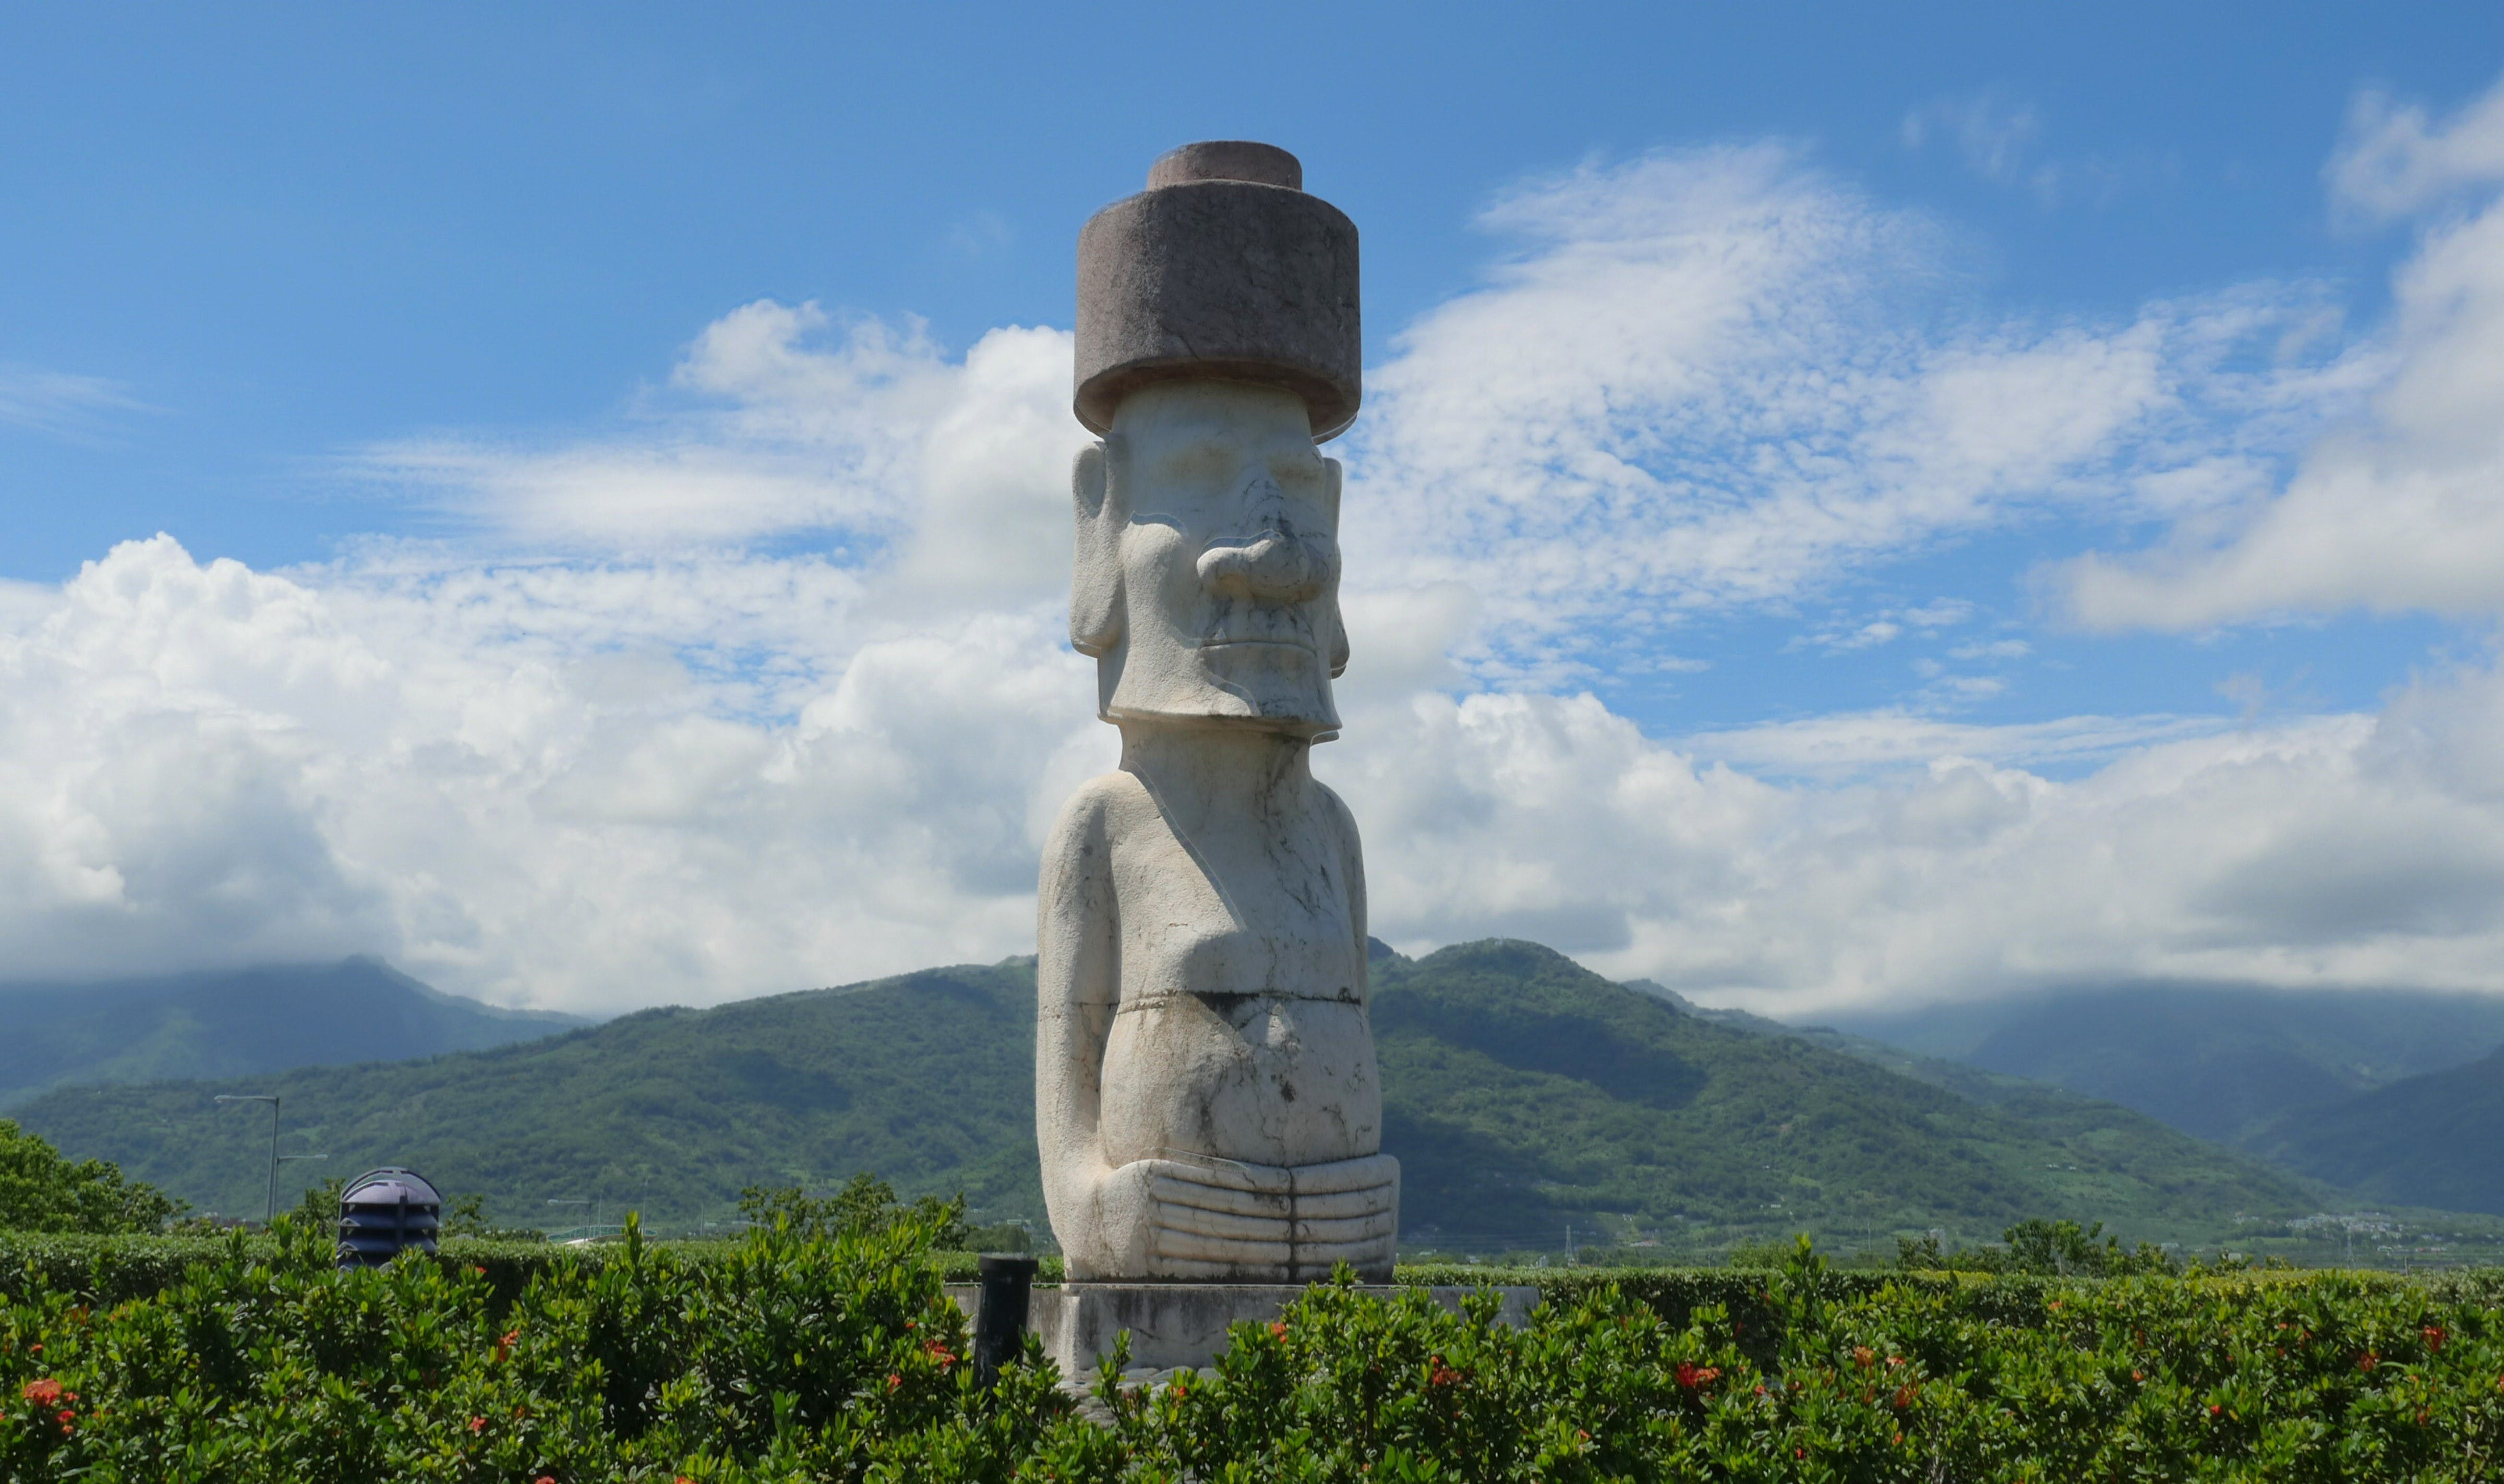 A large moai statue similar to those found on Easter Island sits on the grounds of Taiwan’s National Museum of Prehistory. Photo Credit: Taiwan National Museum of Prehistory